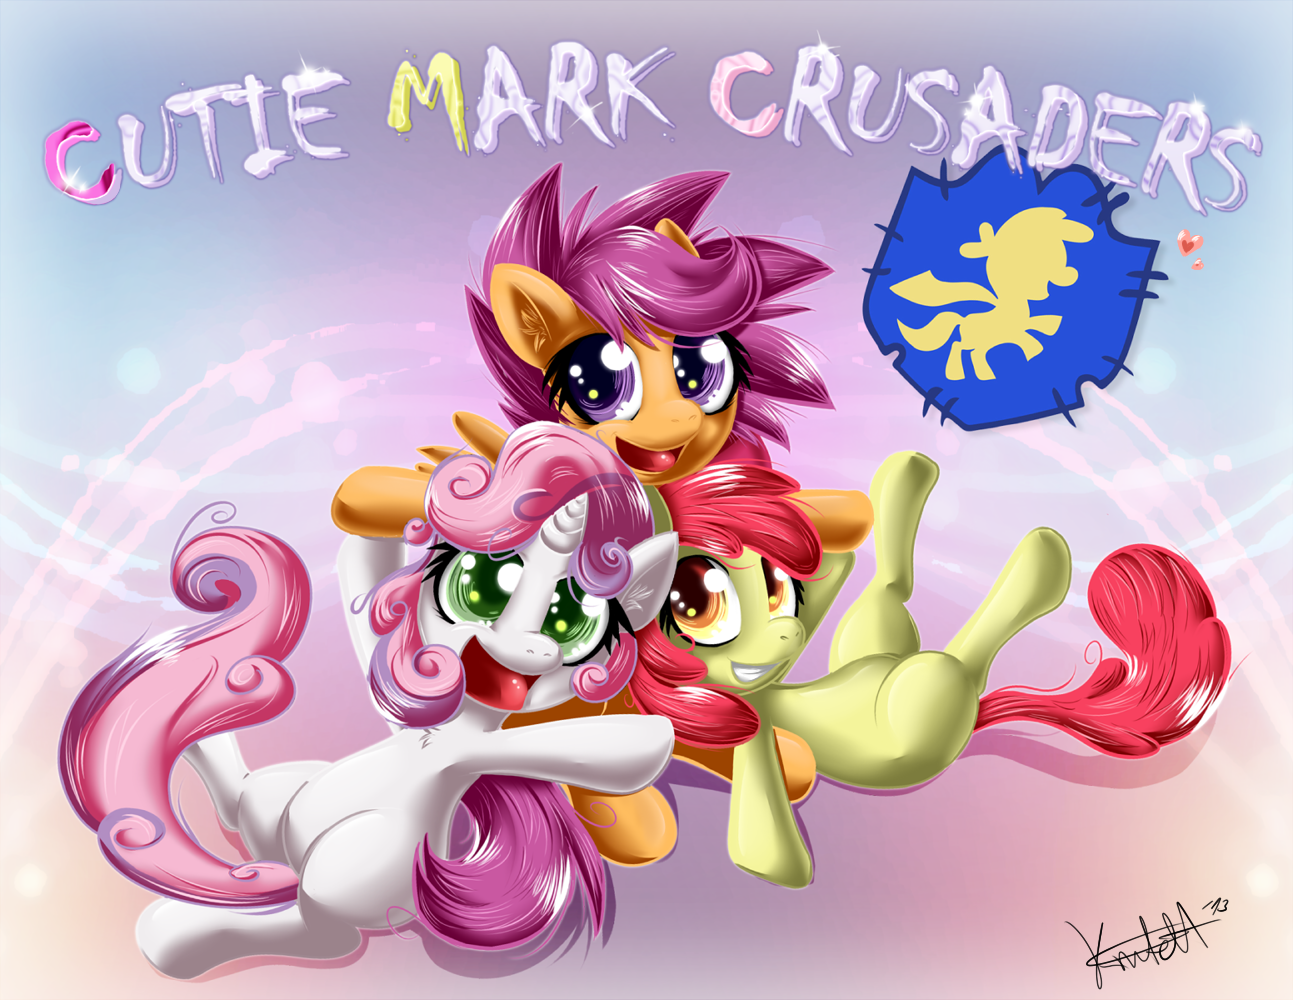 [Bild: cutie_mark_crusaders_finished_by_knifeh-d5s3quv.png]